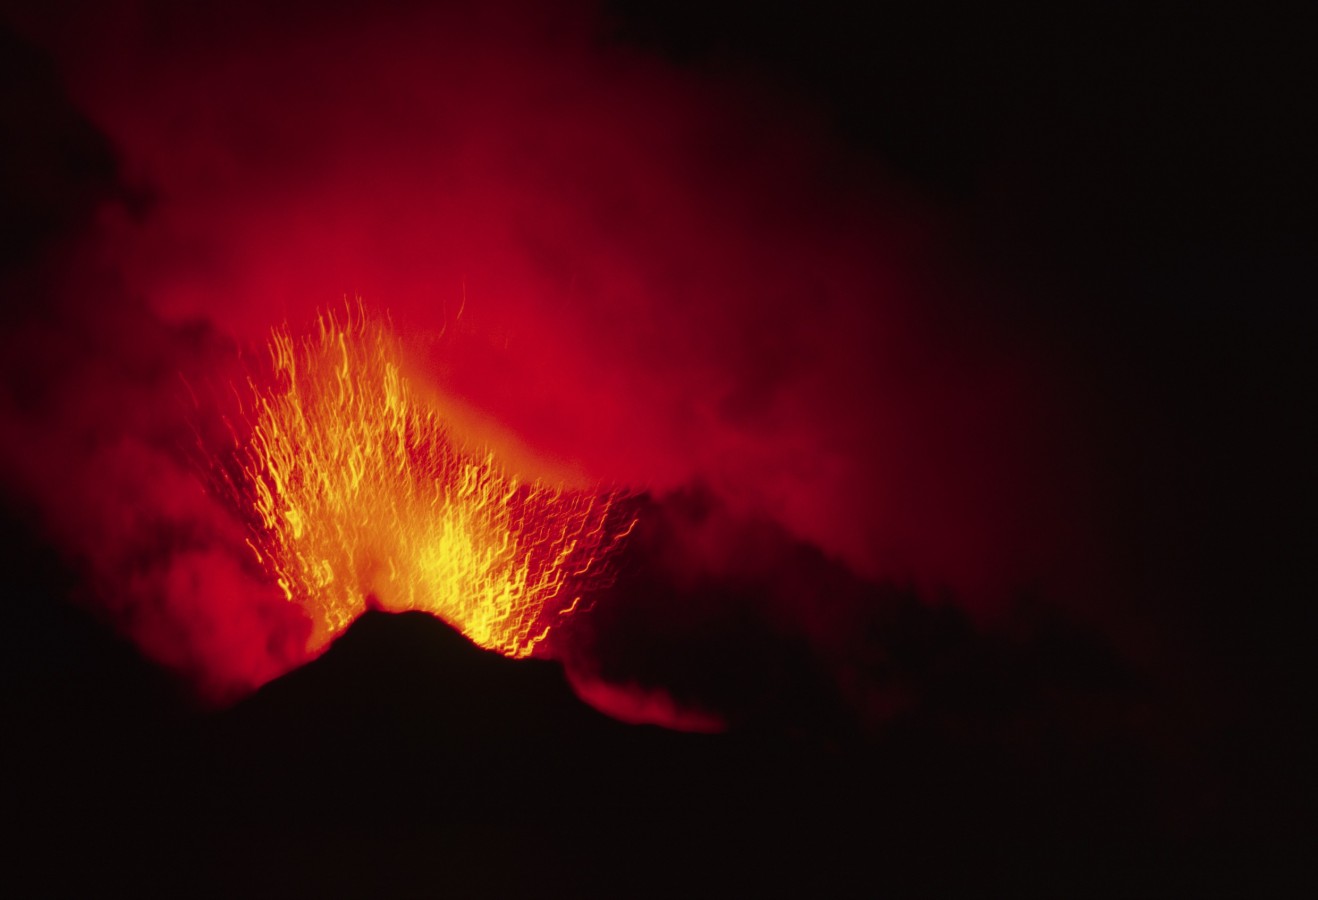 The Stromboli vulcano, active fireworks at the top after sunset